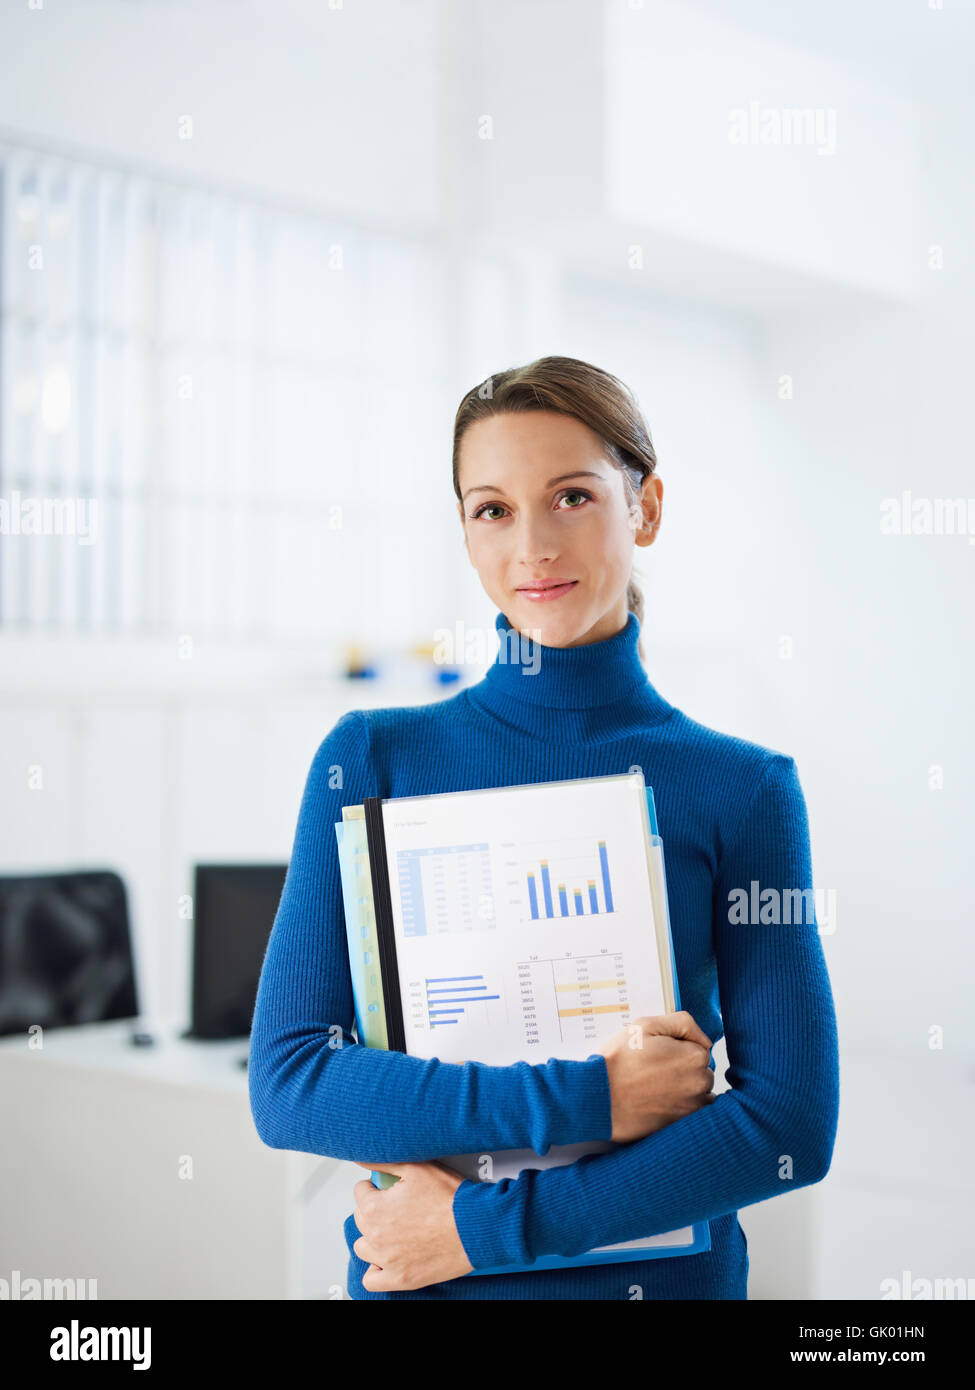 woman office laugh Stock Photo